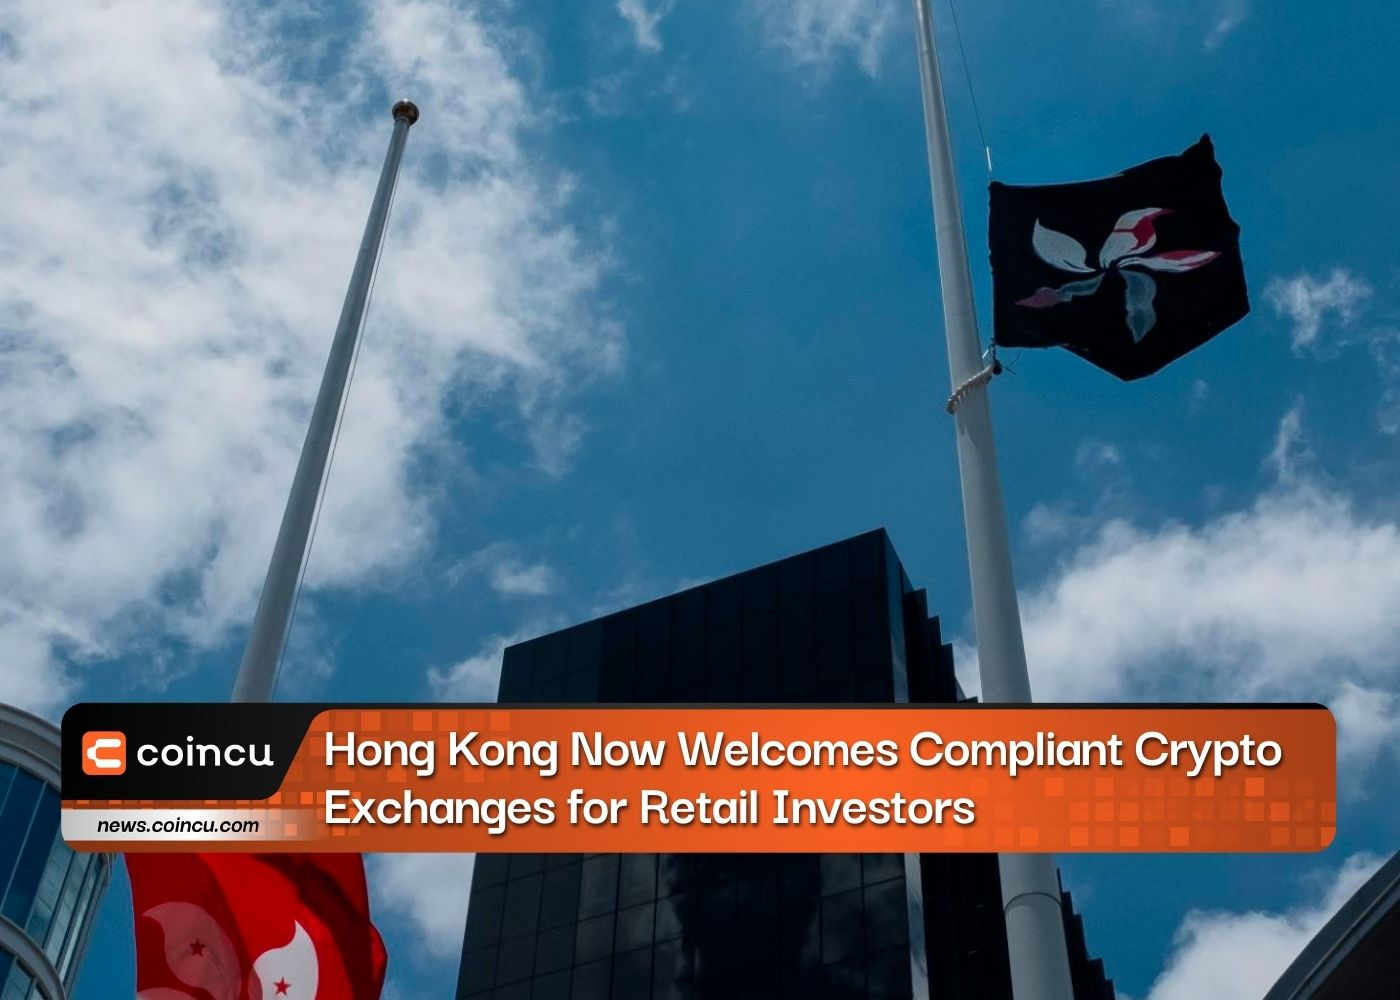 Hong Kong Now Welcomes Compliant Crypto Exchanges for Retail Investors